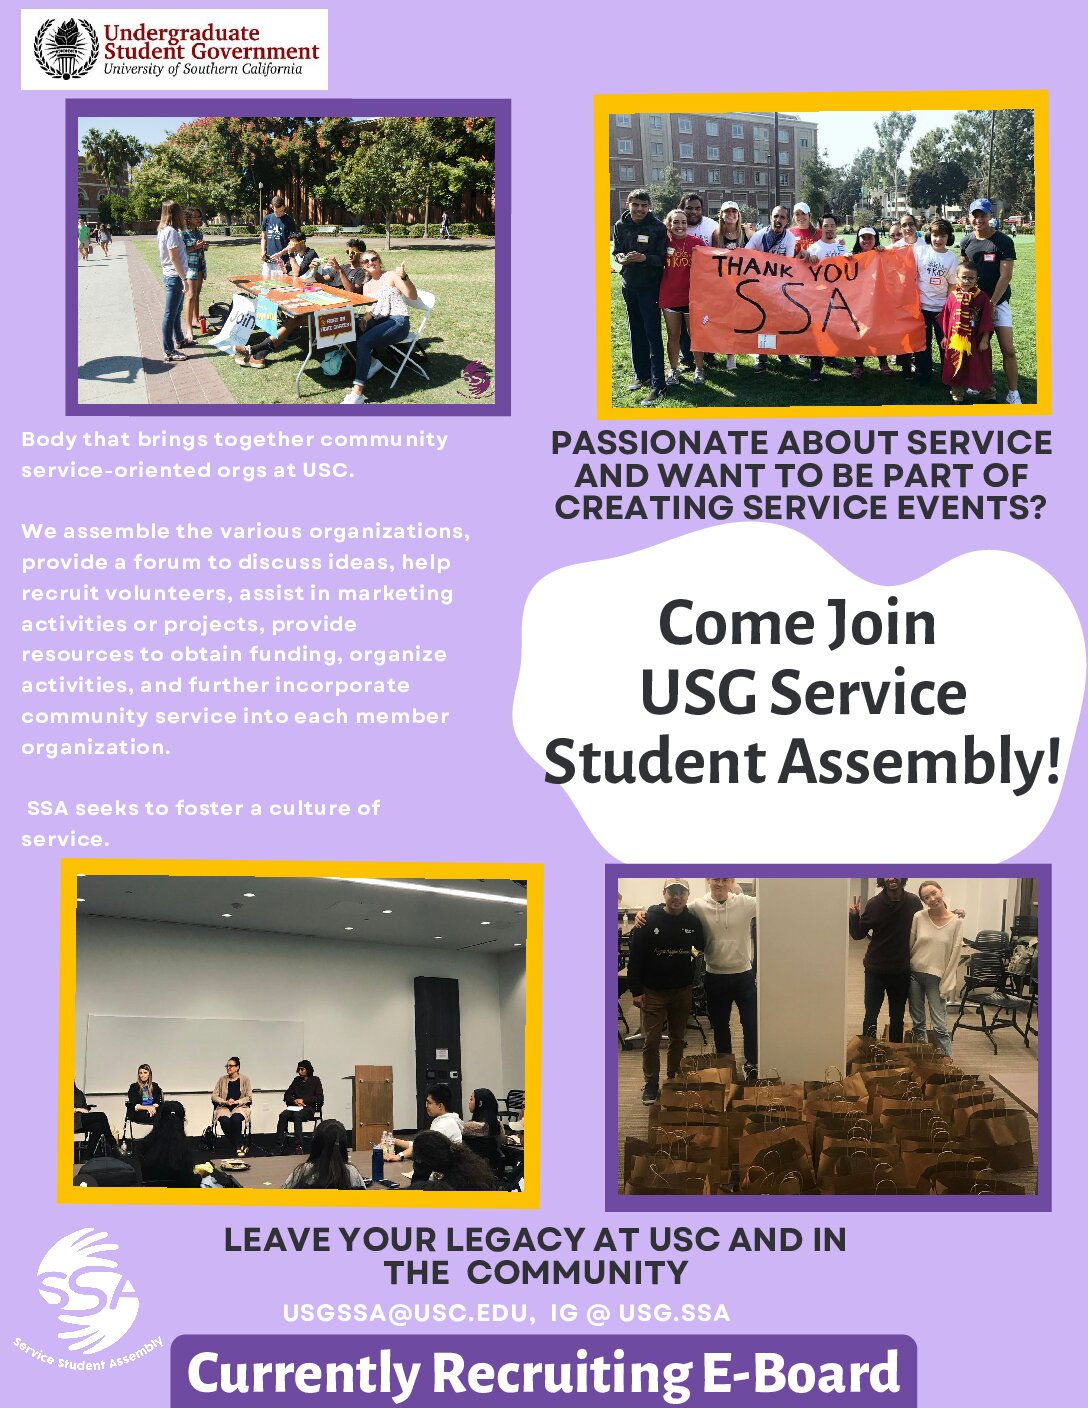 Featured image for “USC Undergraduate Student Government Student Service Assembly E-Board Recruitment”